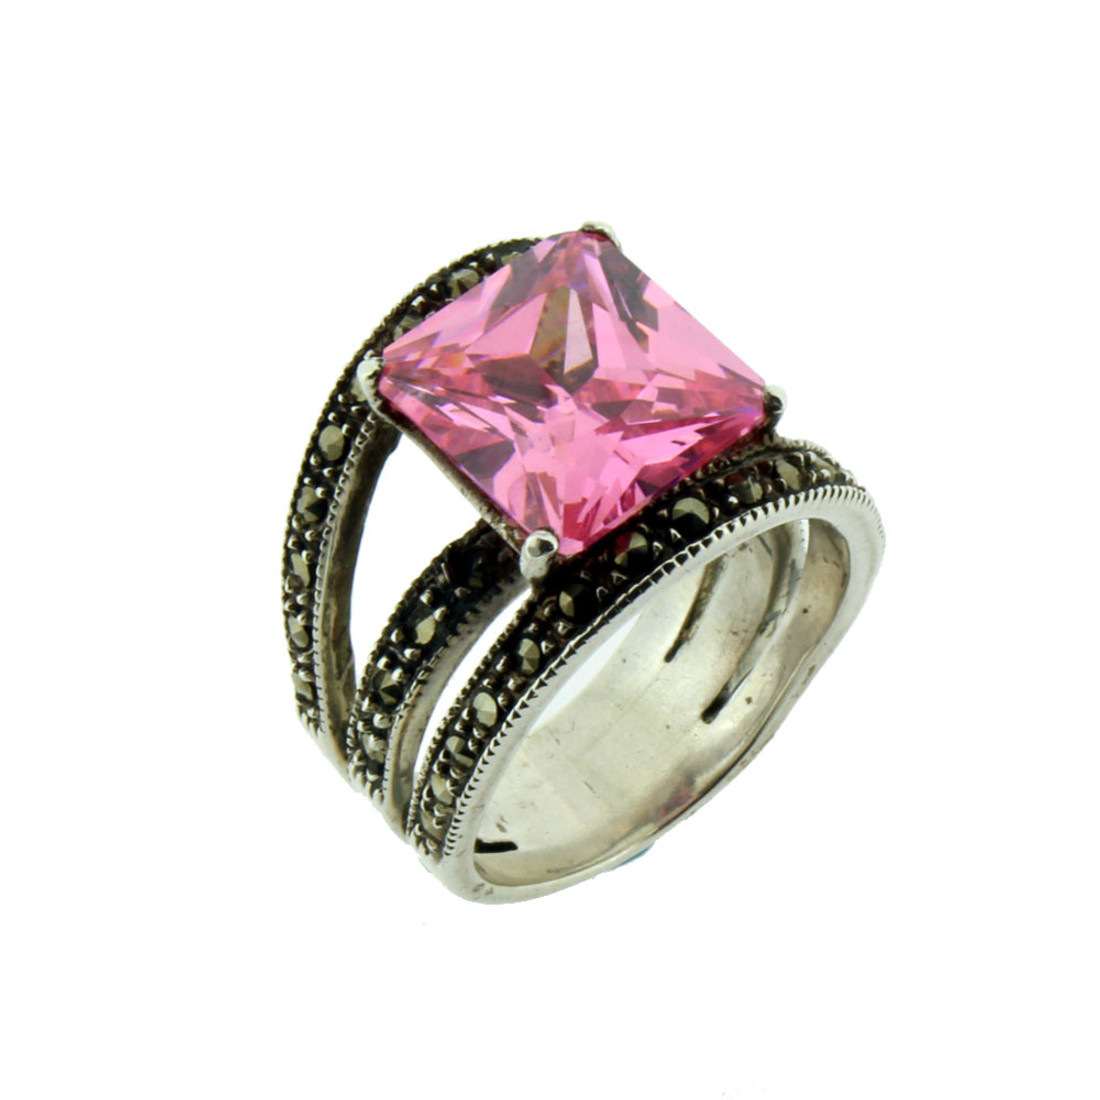 Sterling silver Marcasite and pink CZ ring.